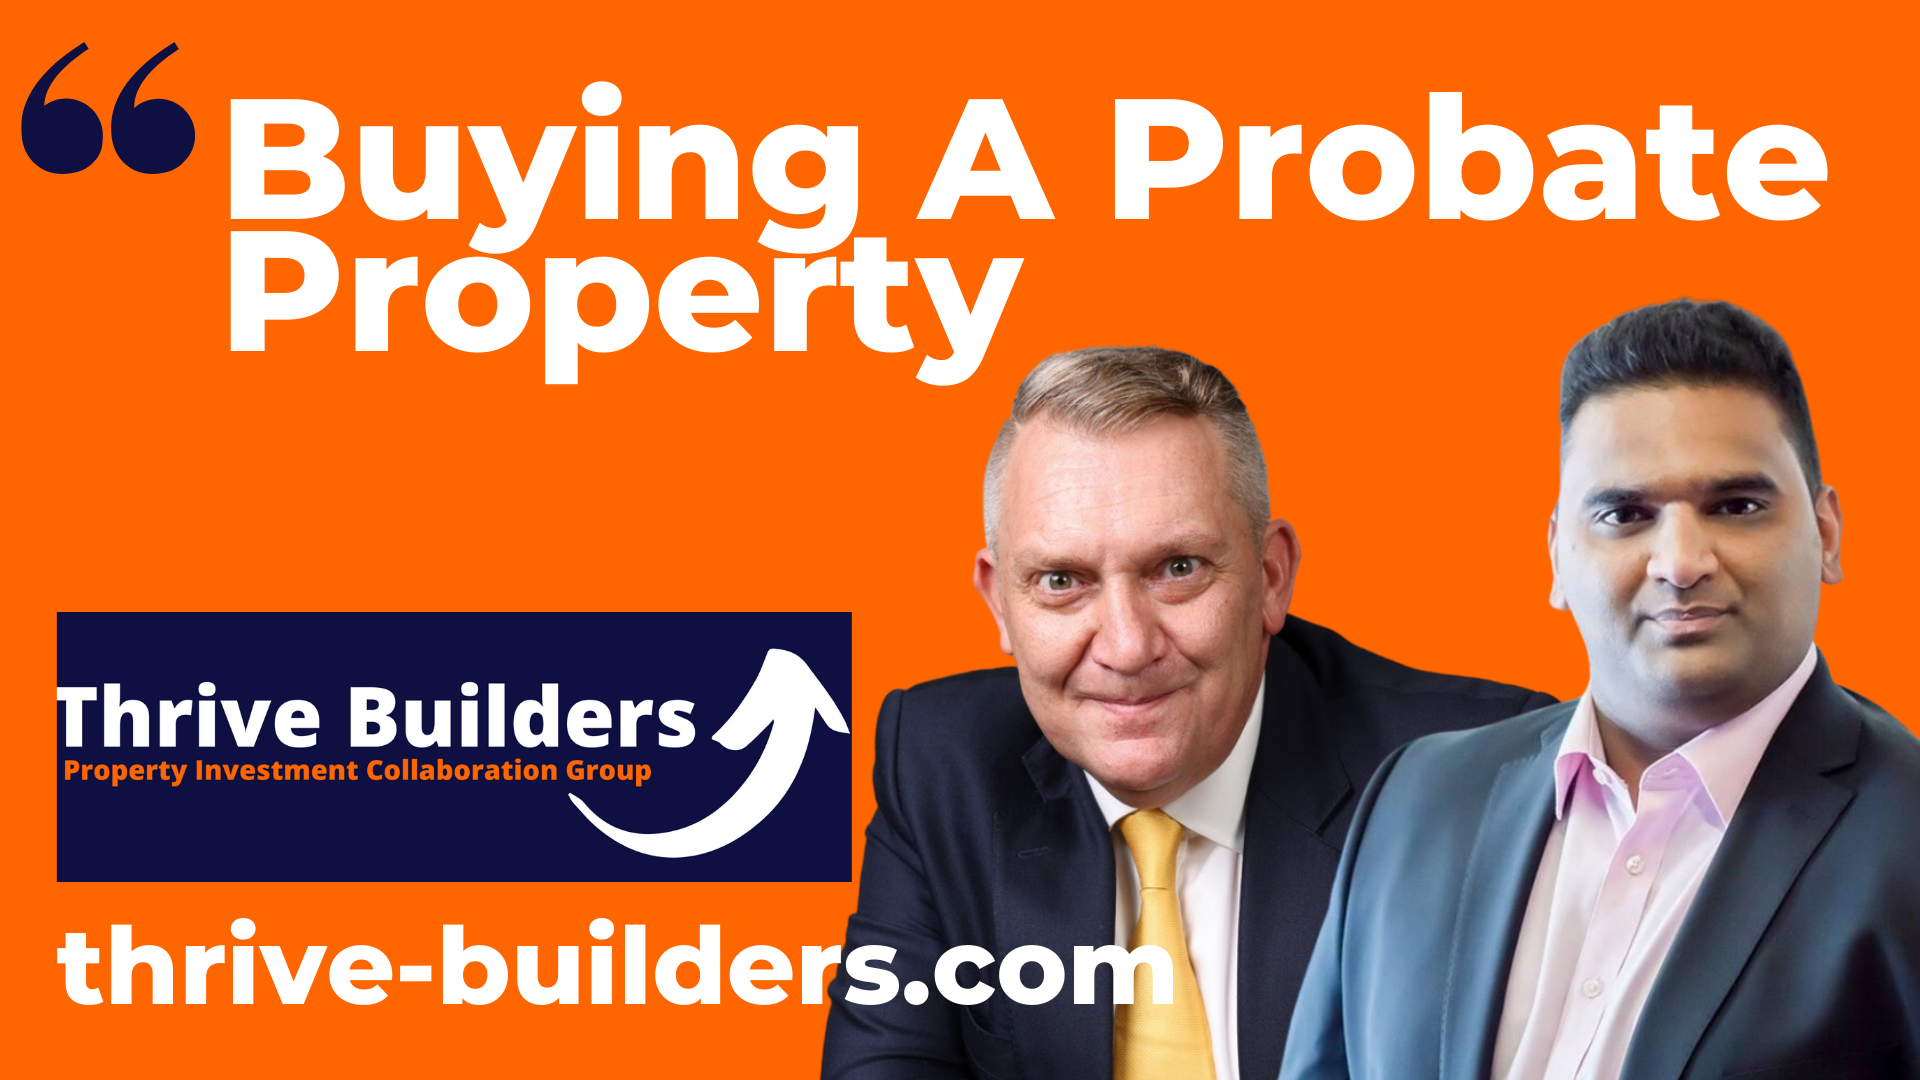 Buying a Probate Property